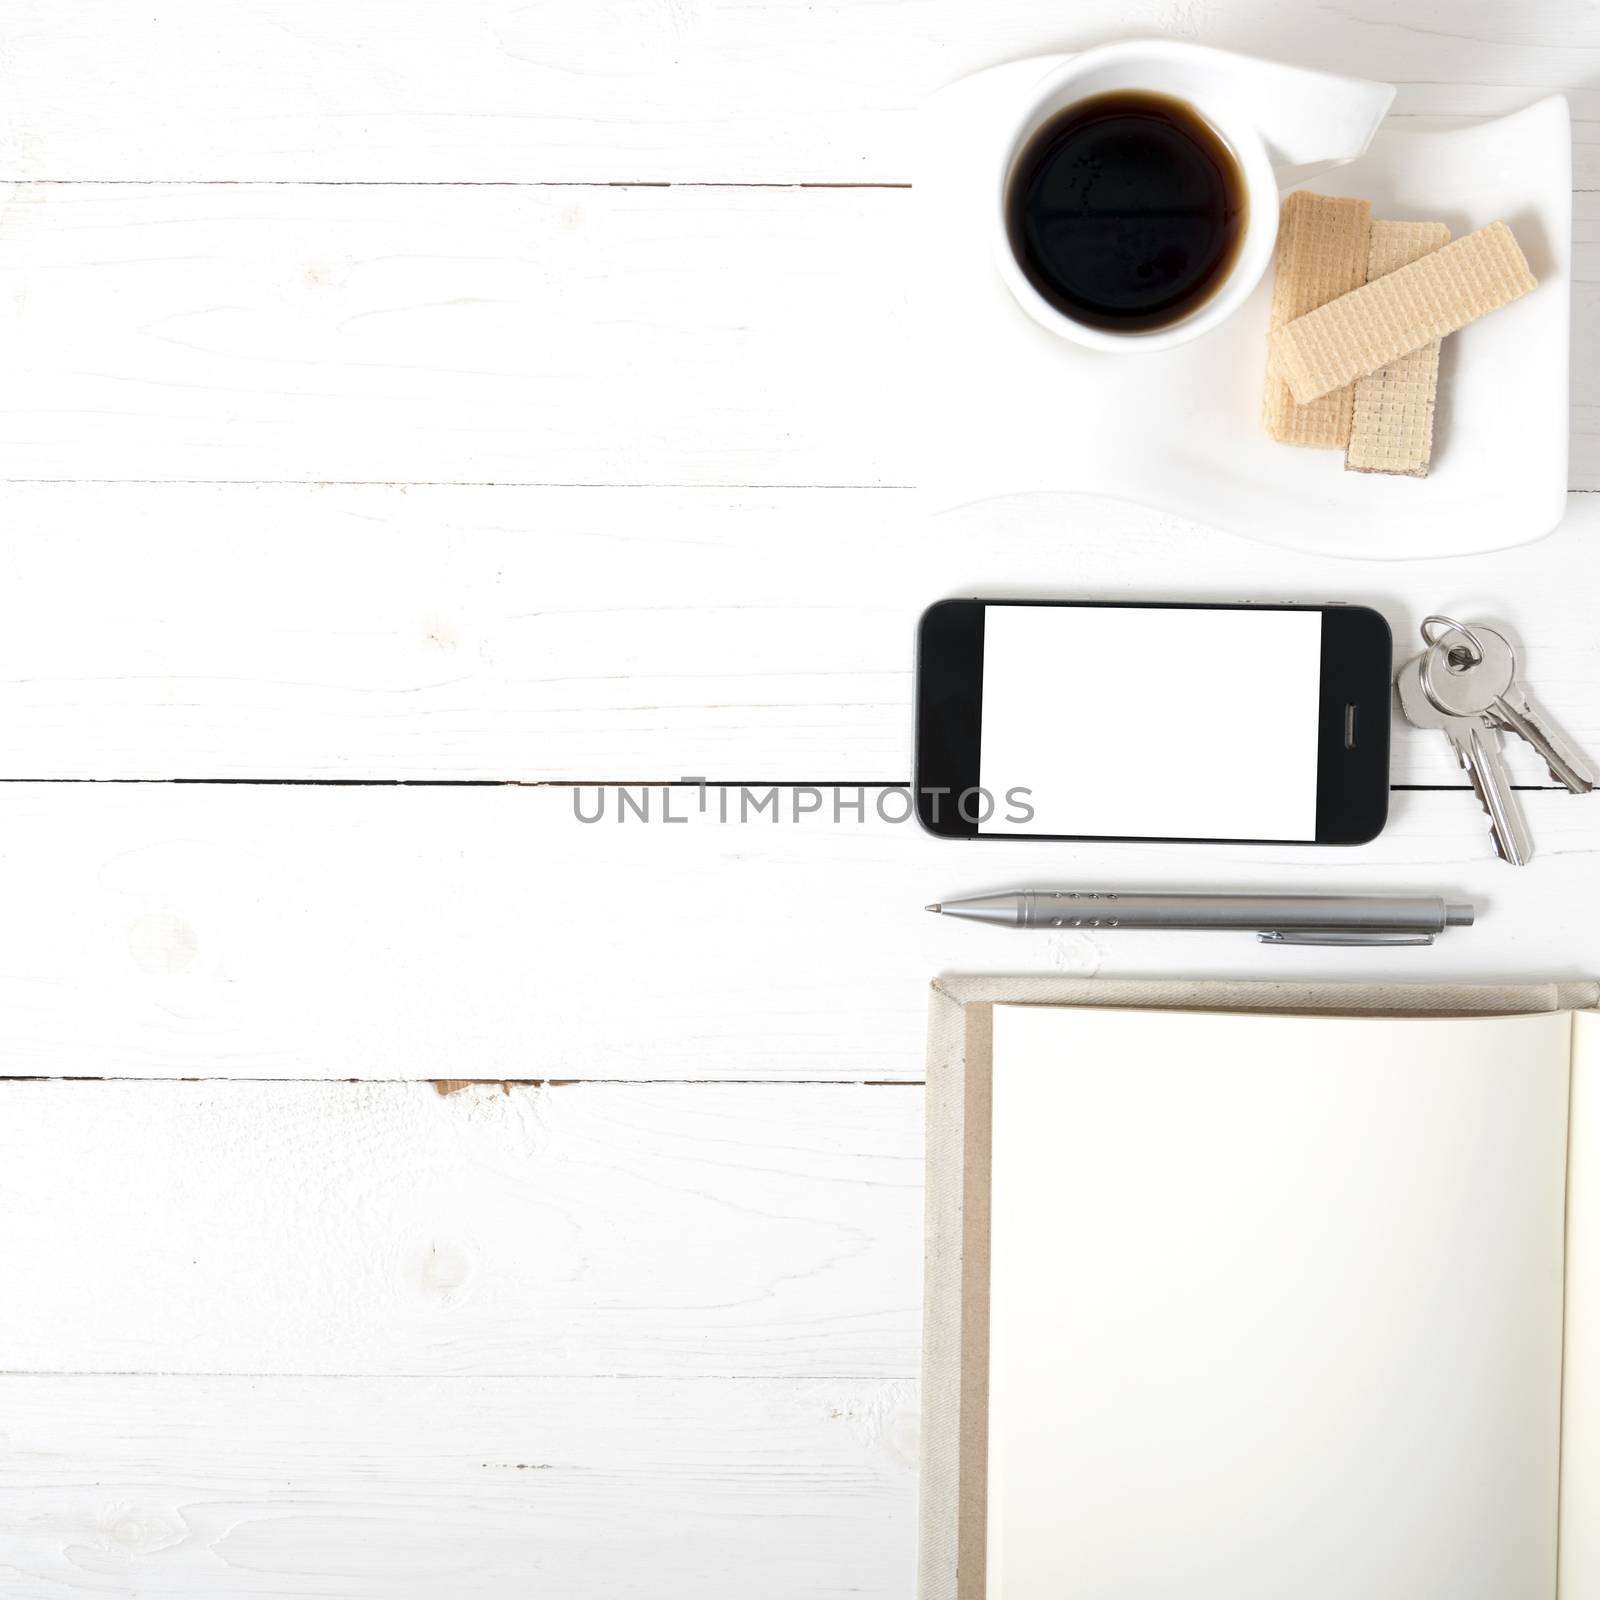 coffee cup with wafer,phone,key,notebook by ammza12